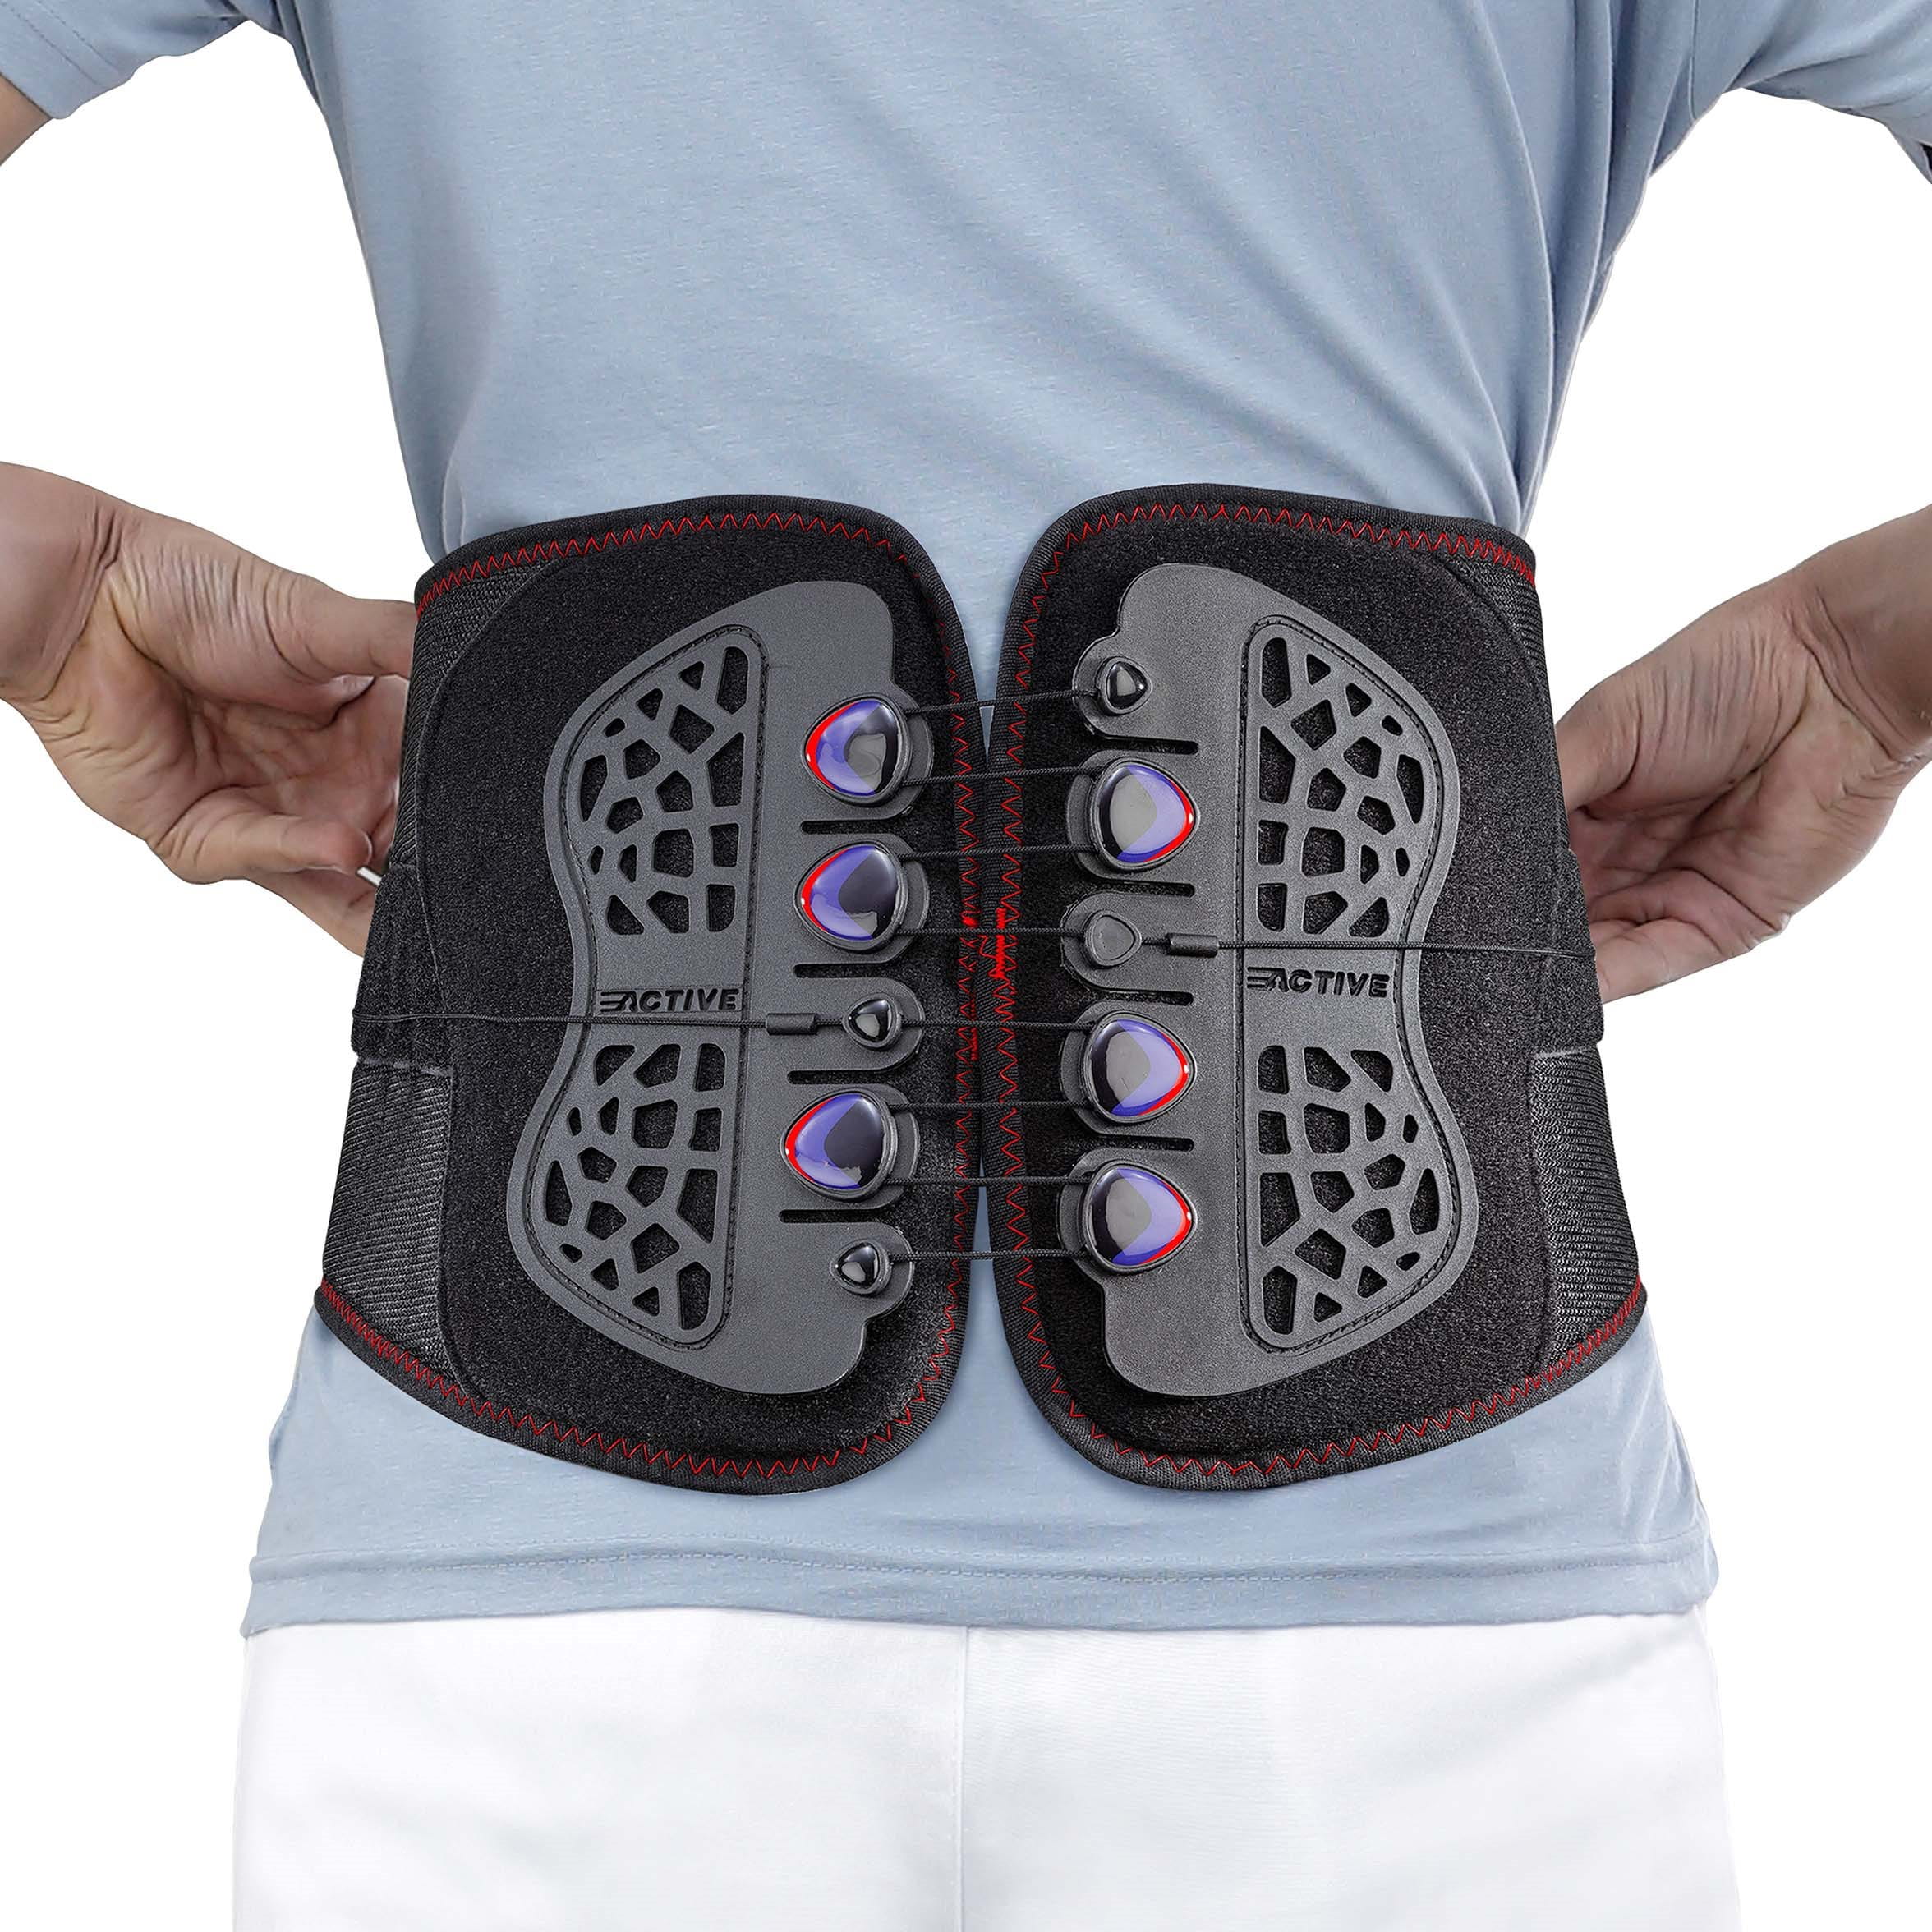 New LACE PULL BELT For Back Pain Relief- Benefits of LS Support